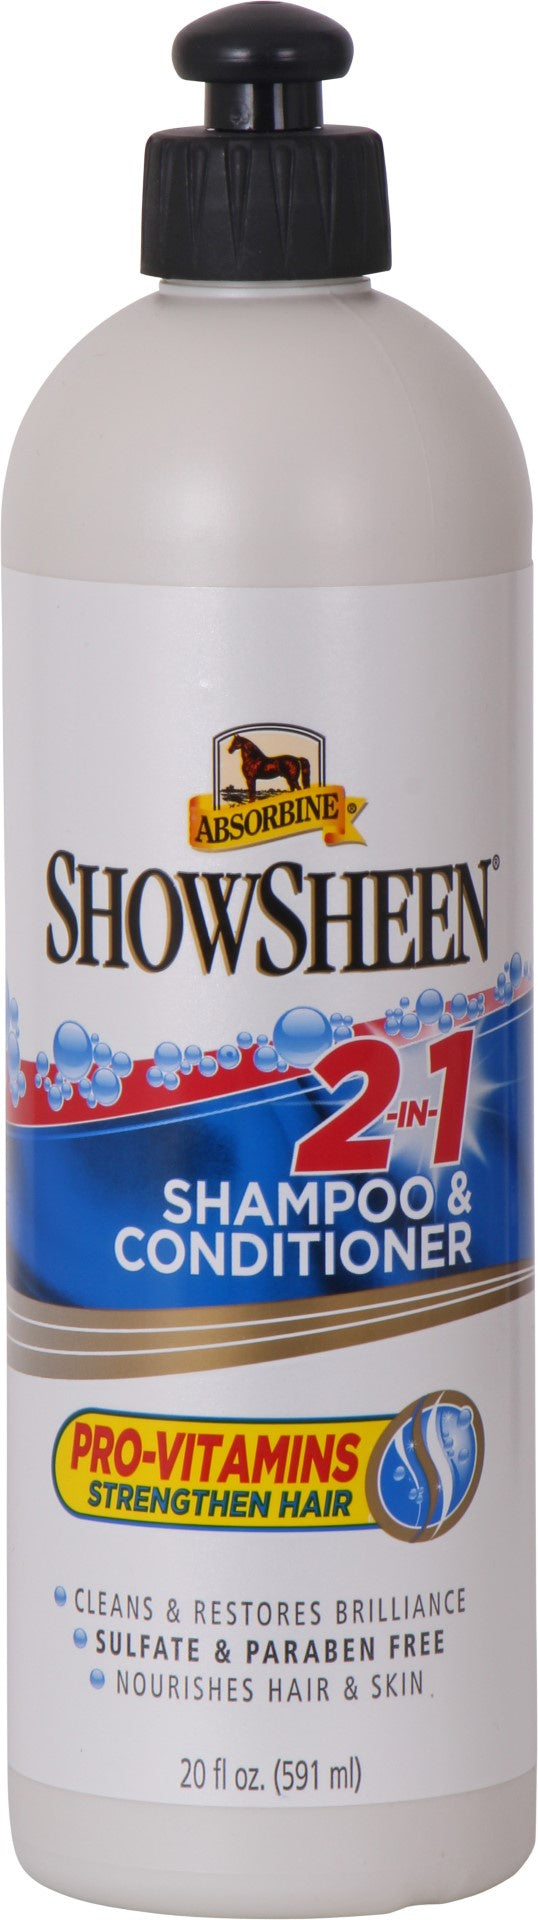 Absorbine ShowSheen 2 in 1 Shampoo and Conditioner